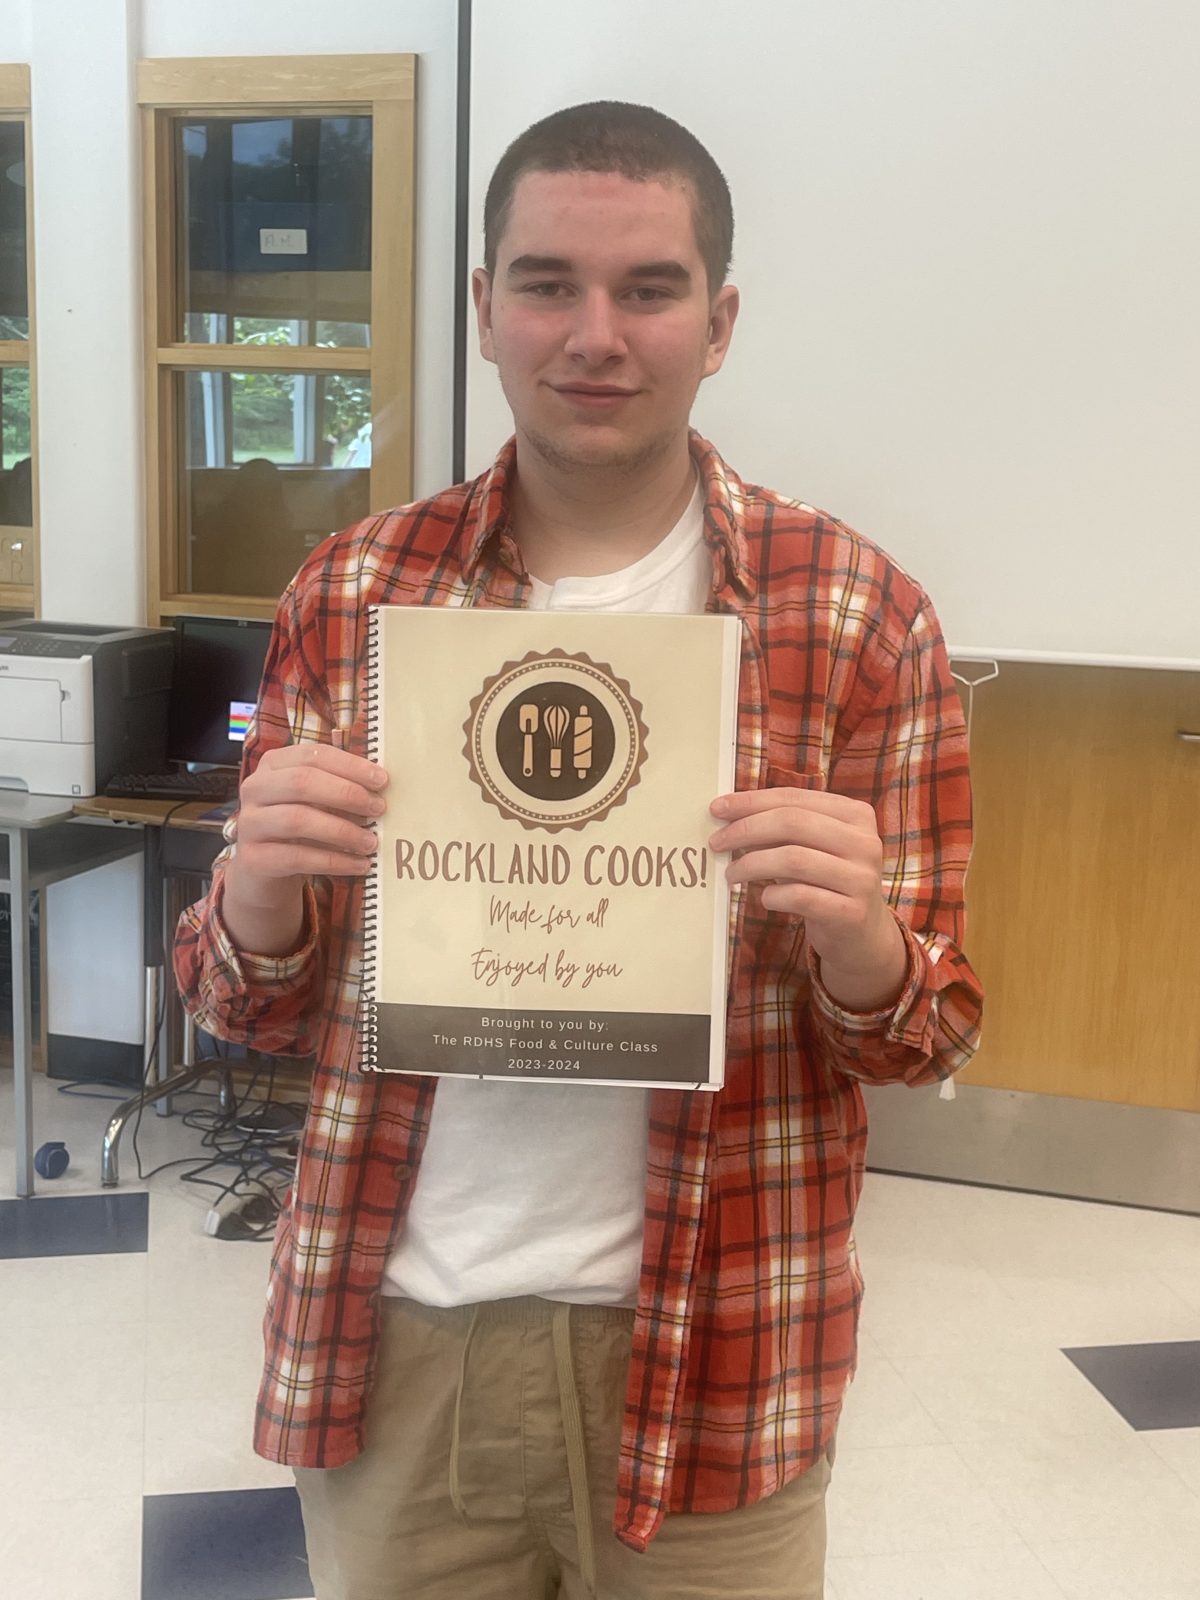 RDHS students unveil cookbook supporting three local organizations